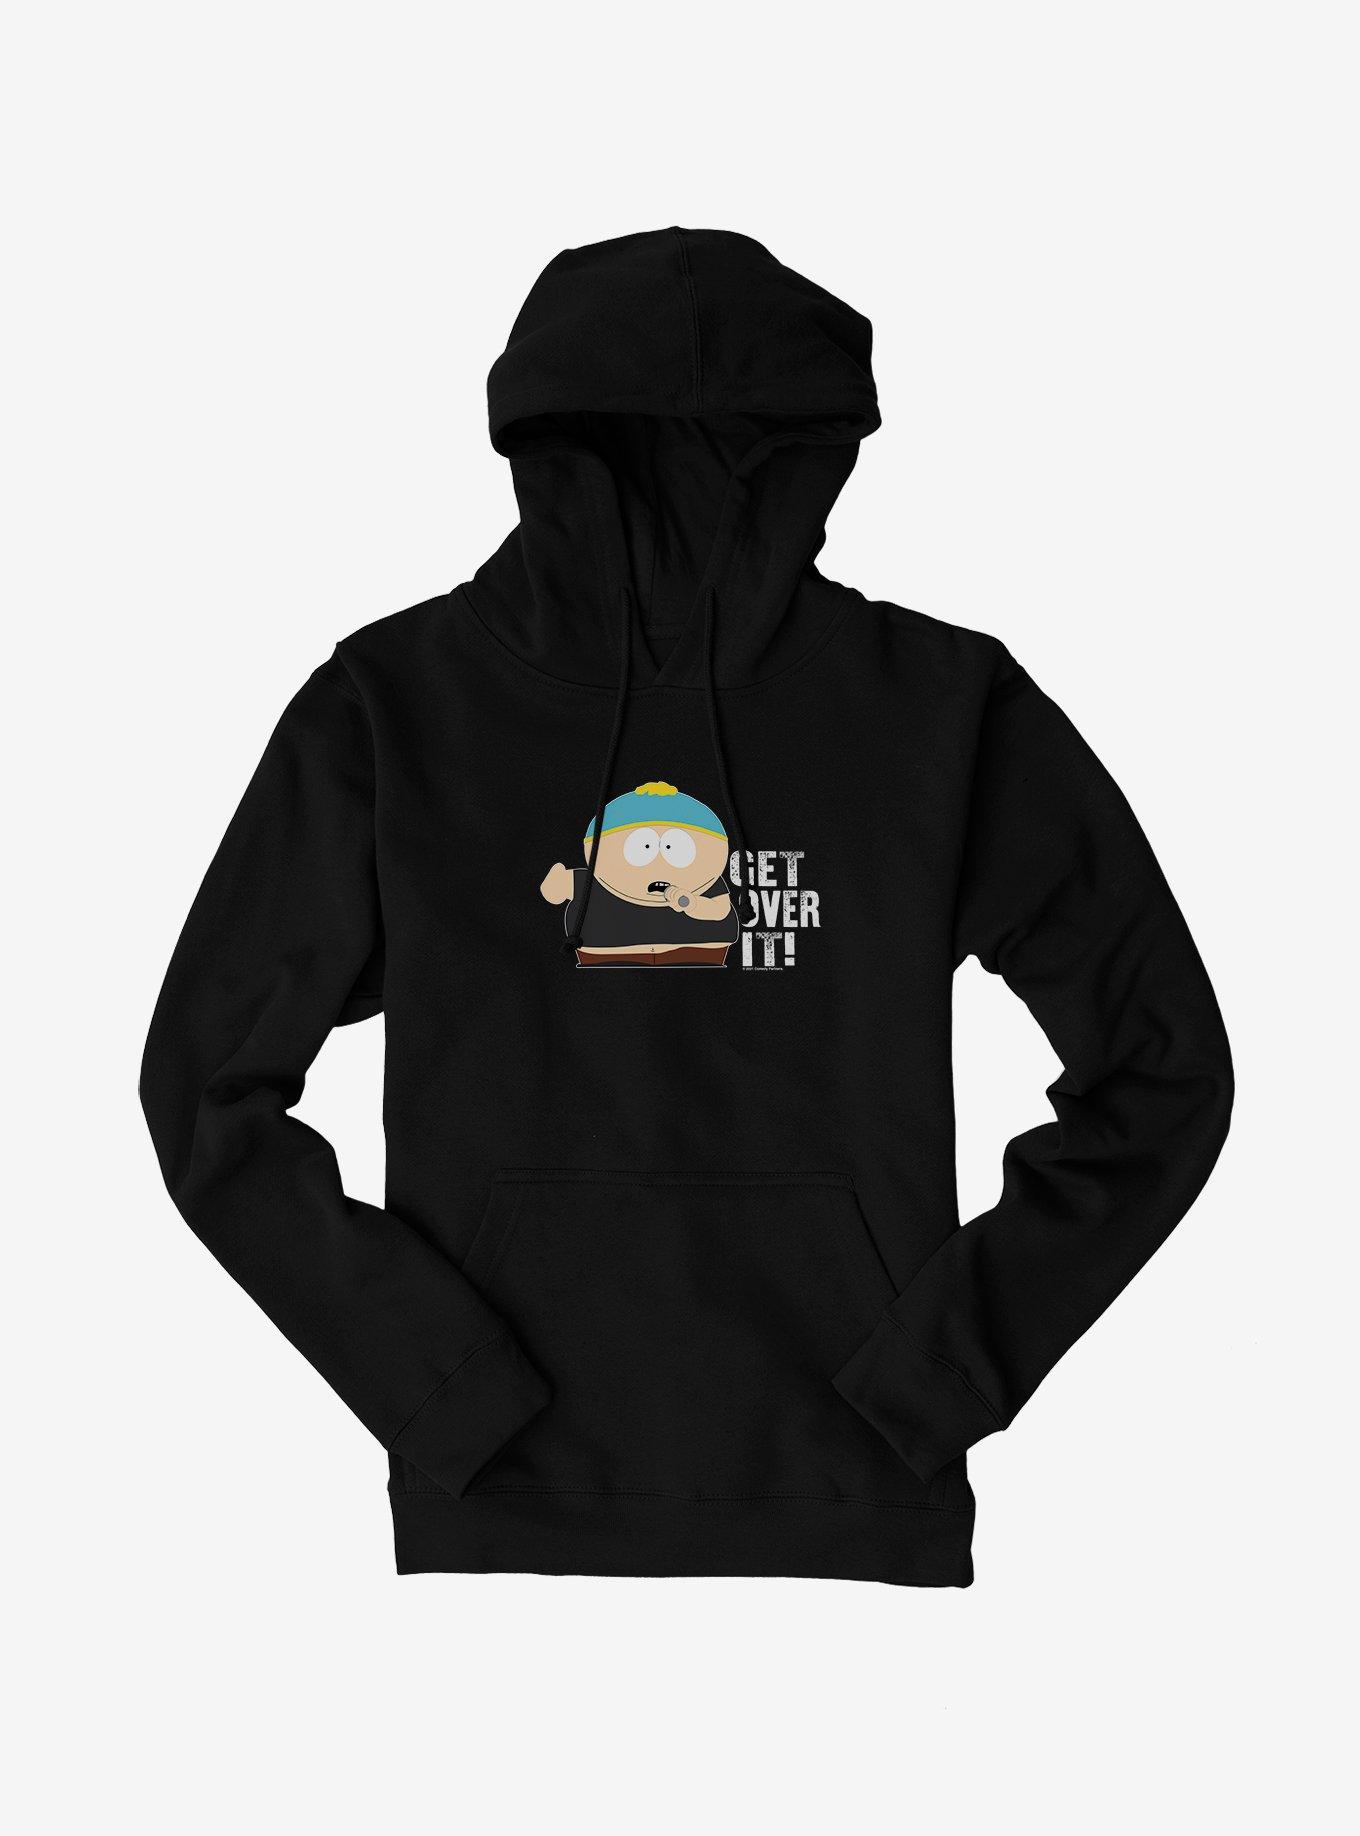 South Park Season Reference Cartman Over It Hoodie